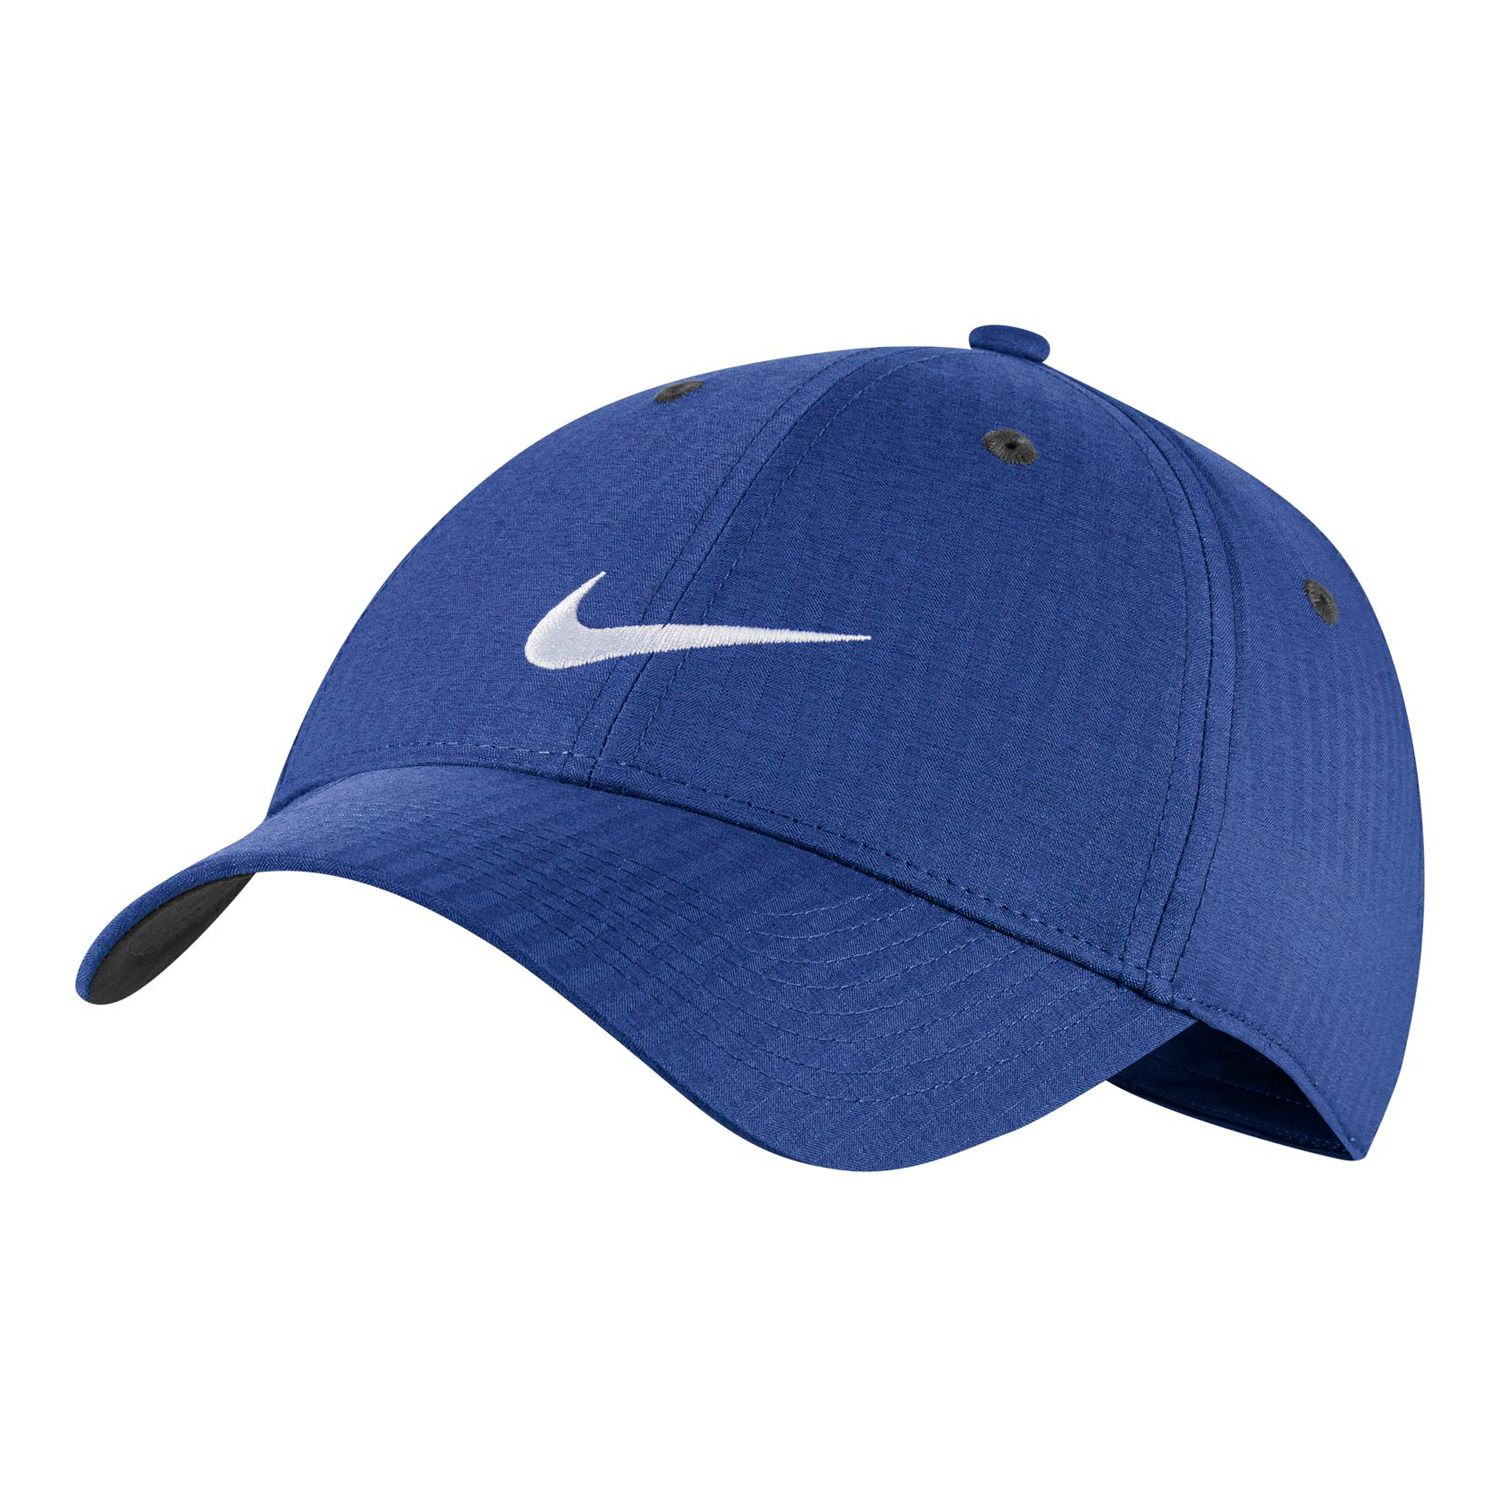 Mens Blue Nike Hats - Accessories 